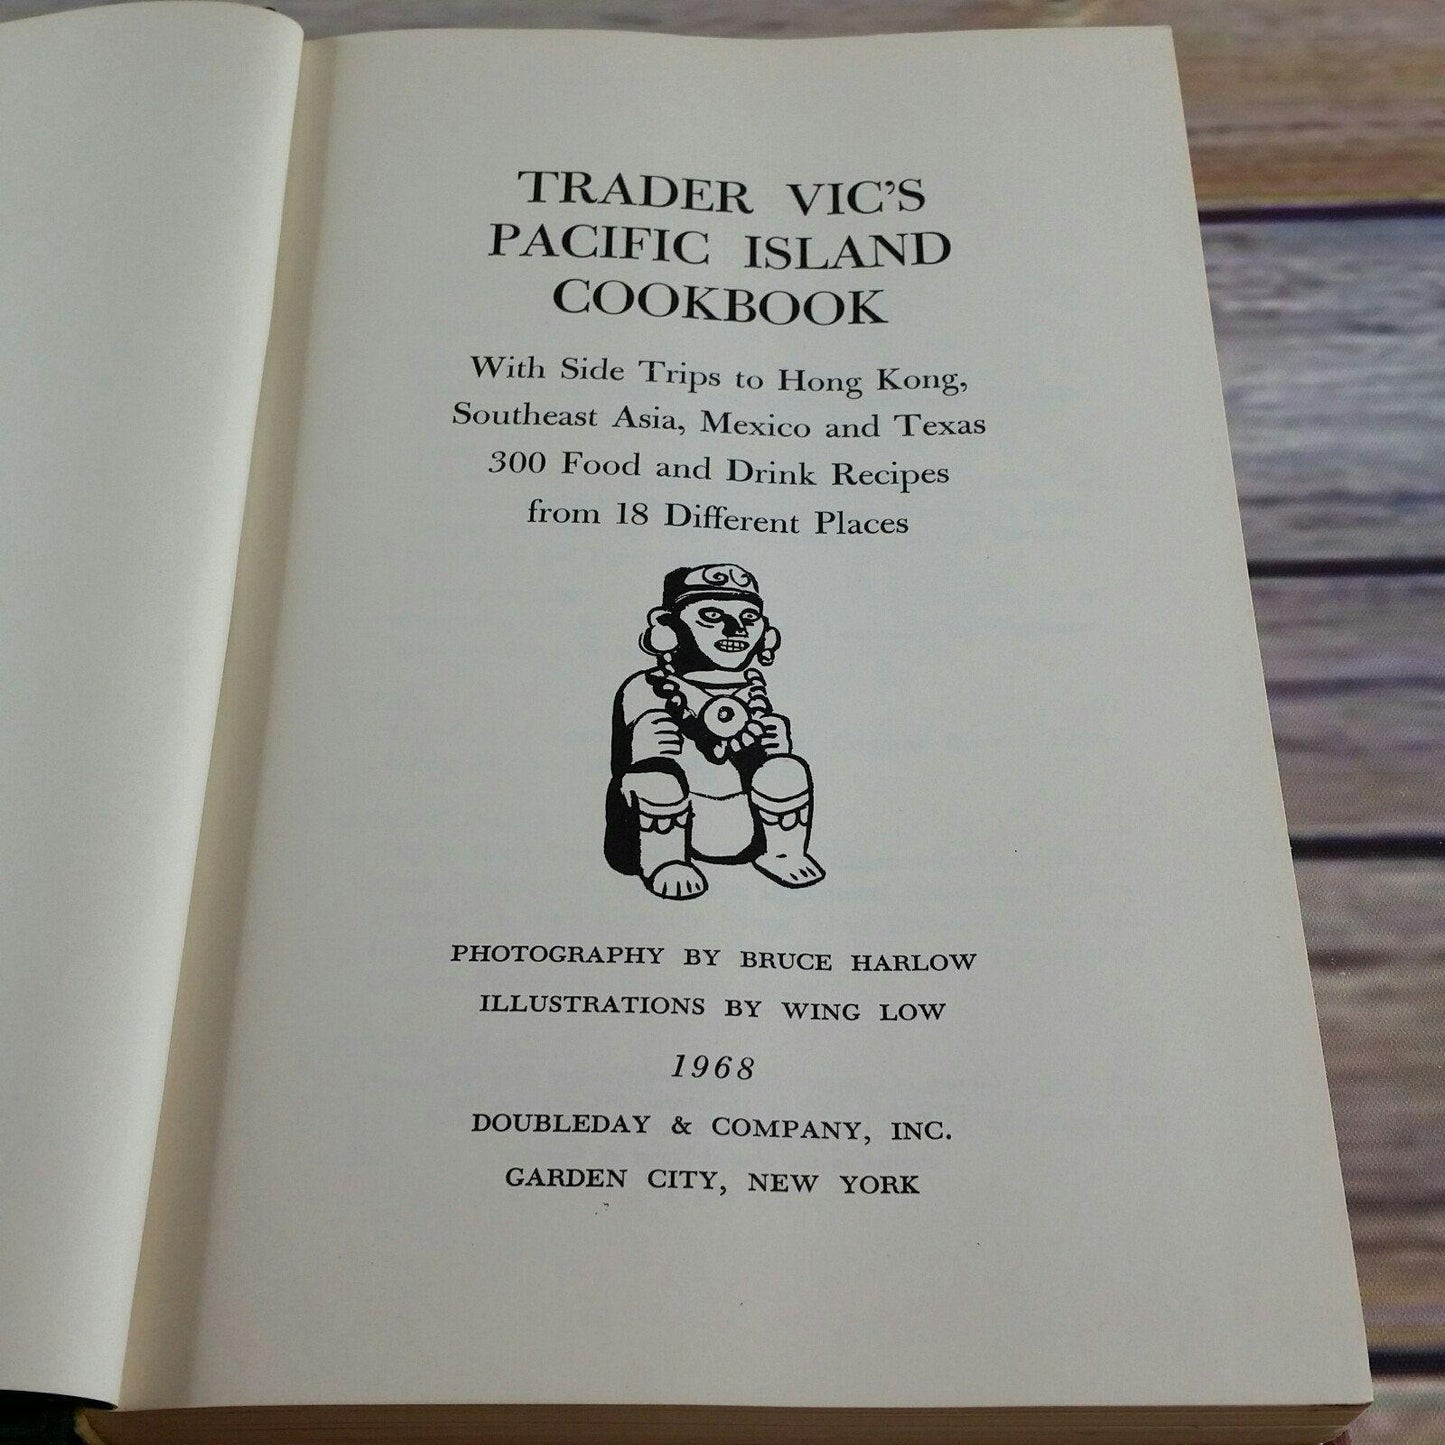 Vintage Trader Vics Pacific Island Cookbook 1968 300 Food and Drink Recipes Doubleday Hardcover NO Dust Jacket